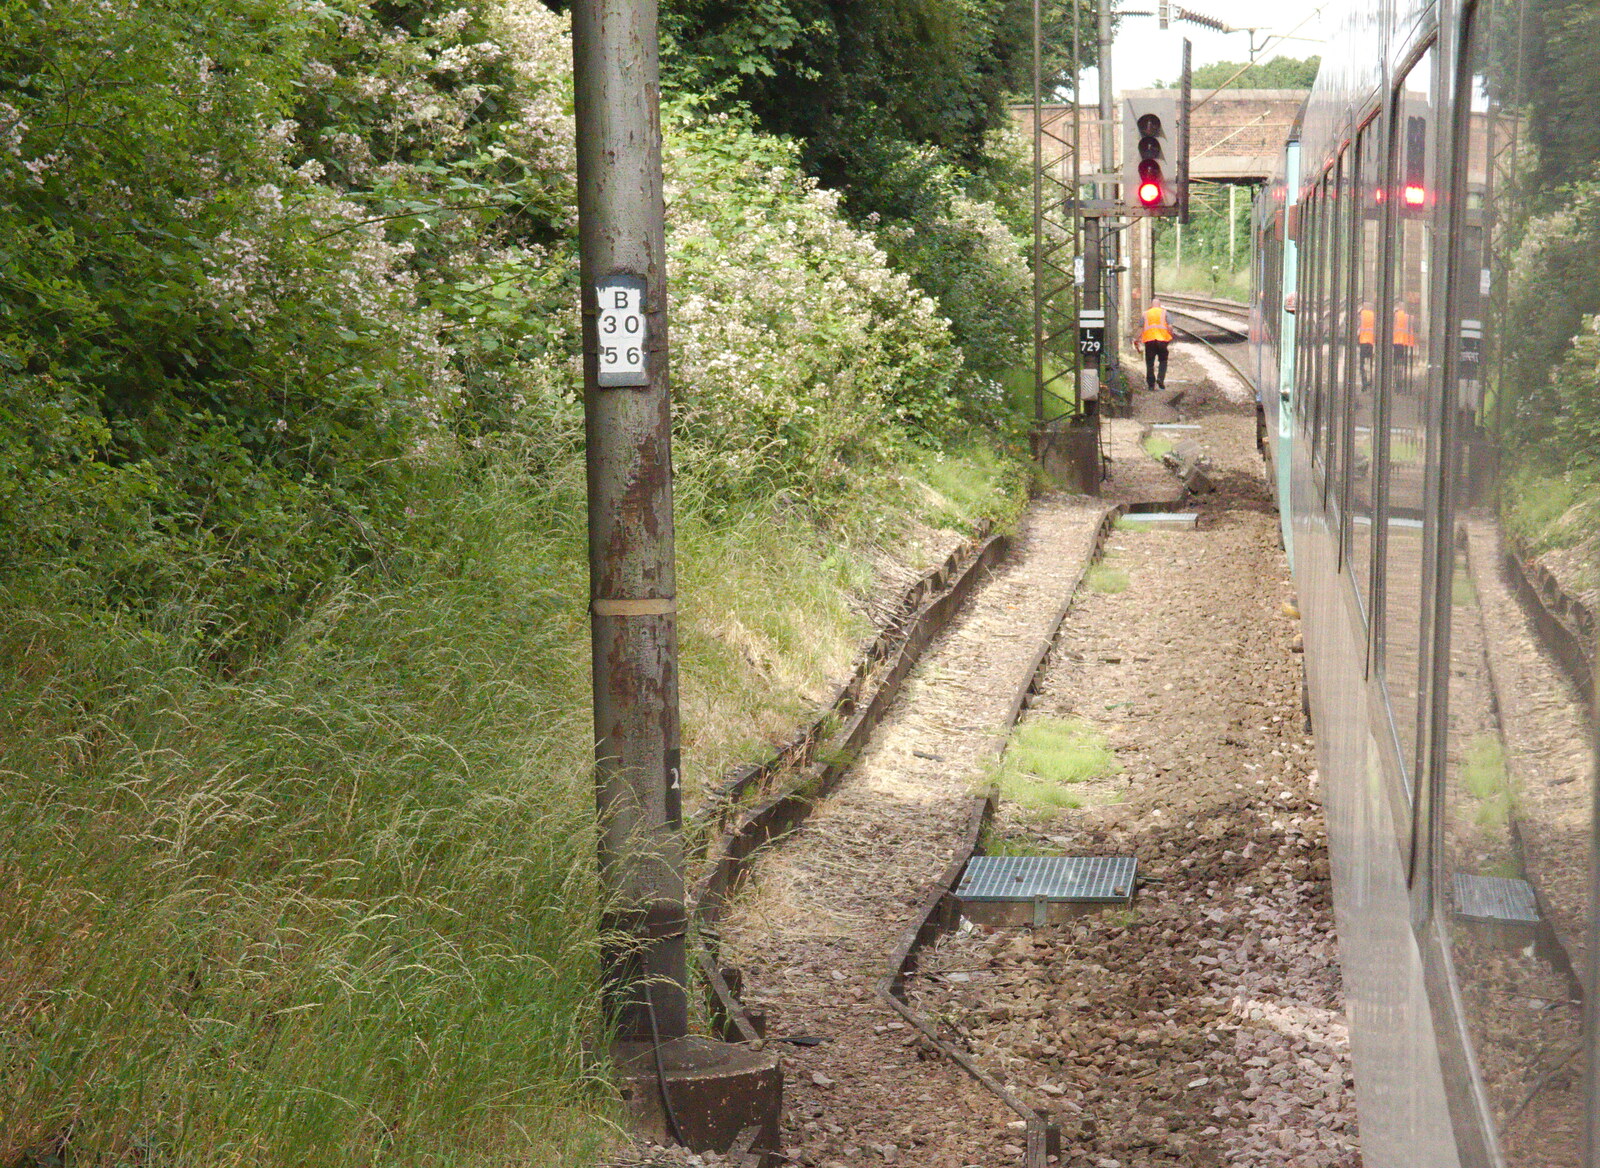 The driver jumps off the train from Railway Hell: A Pantograph Story, Chelmsford, Essex - 17th June 2014